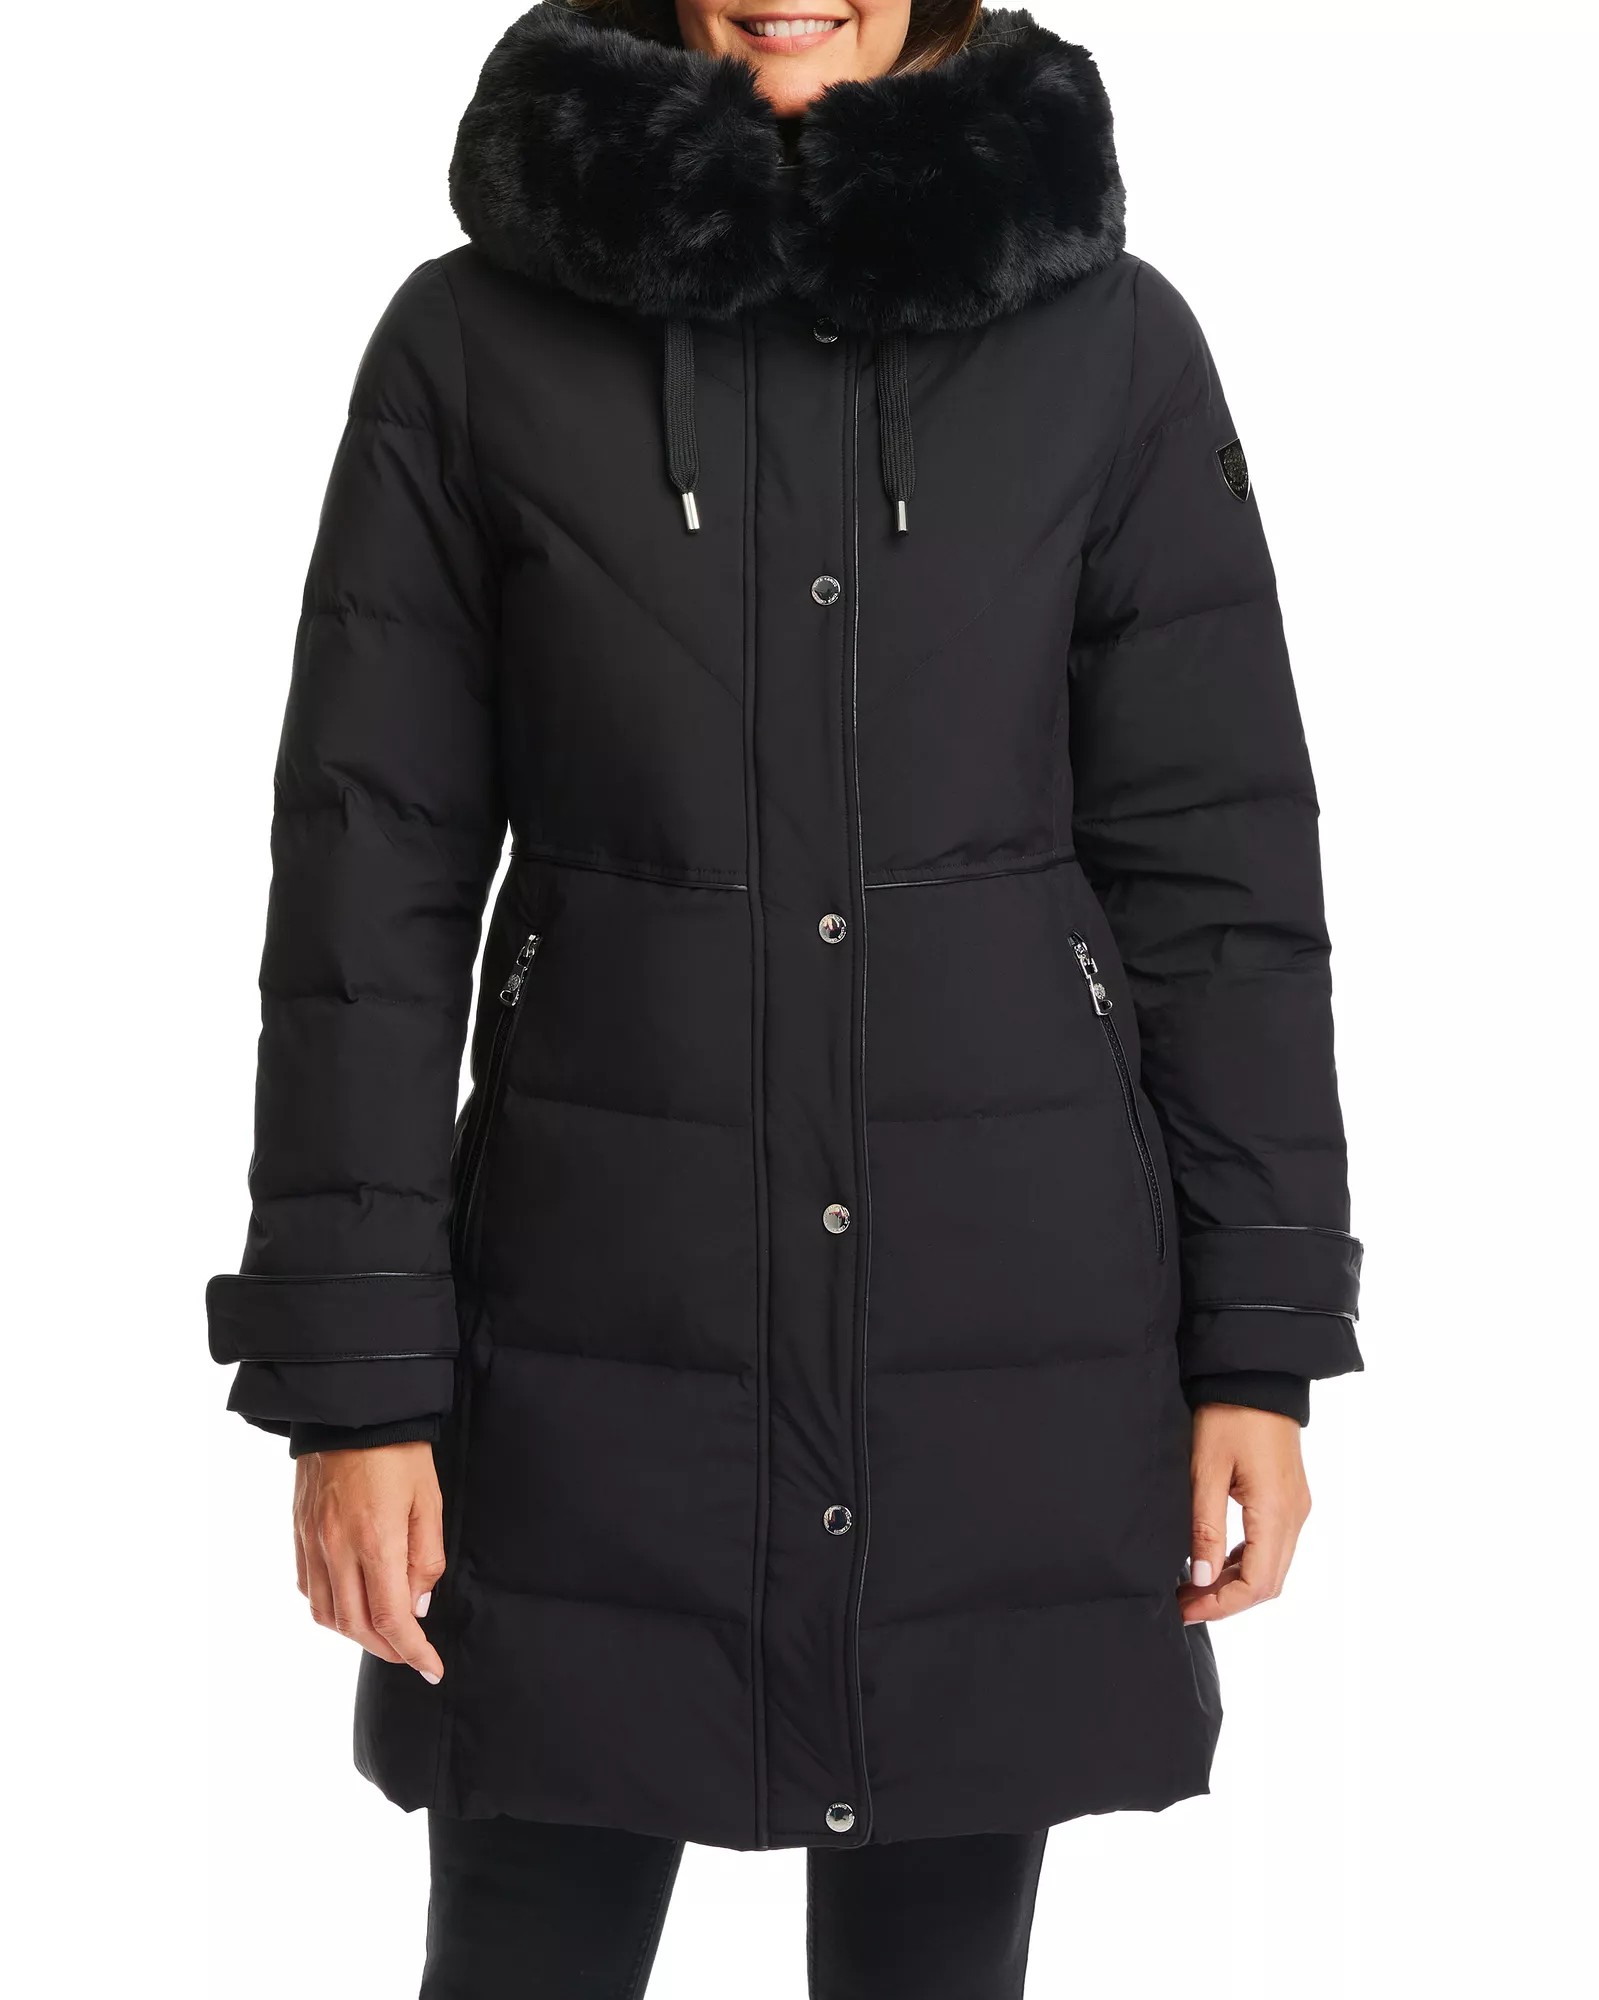 Vince Camuto Faux Fur Trimmed Puffer Coat